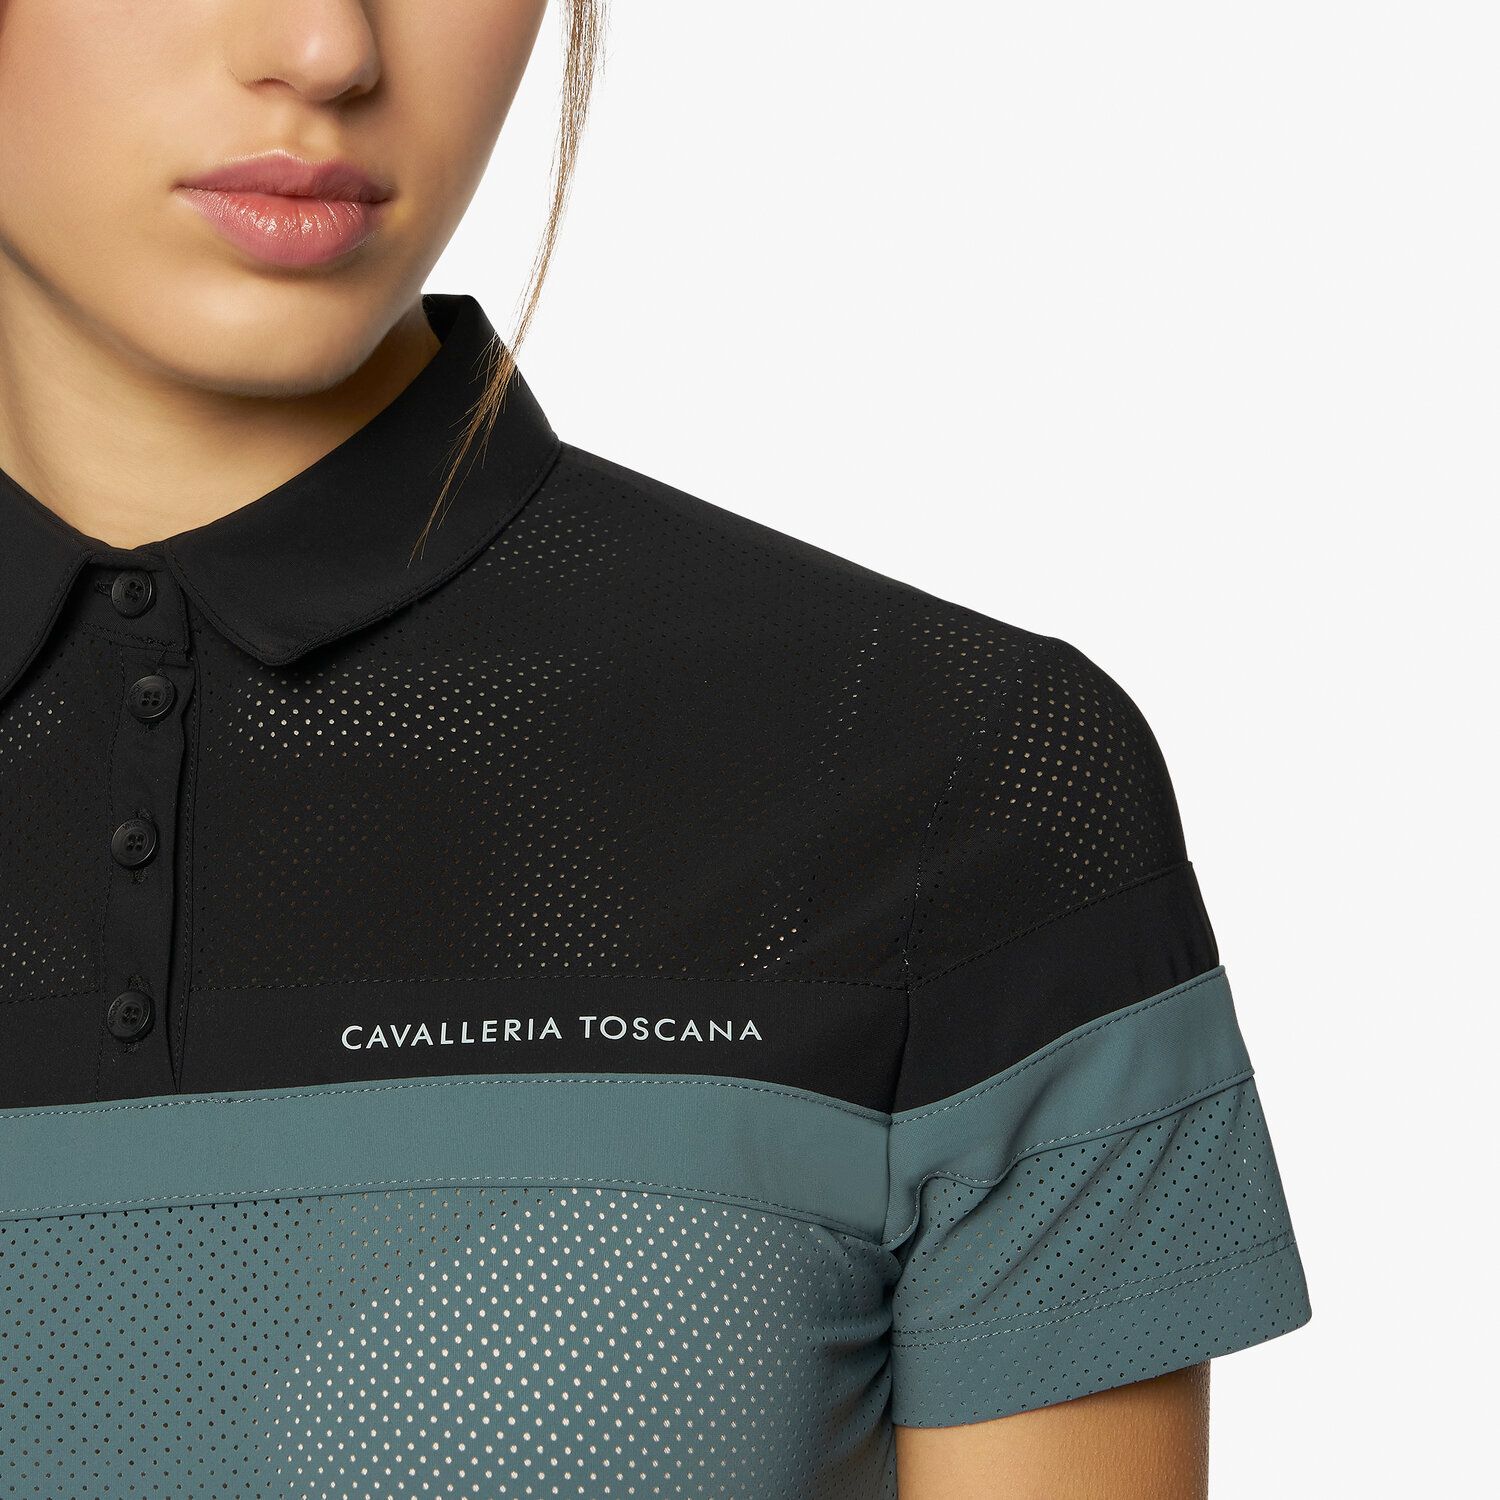 Cavalleria Toscana Women’s S/S Two Tone Perforated Jersey Polo